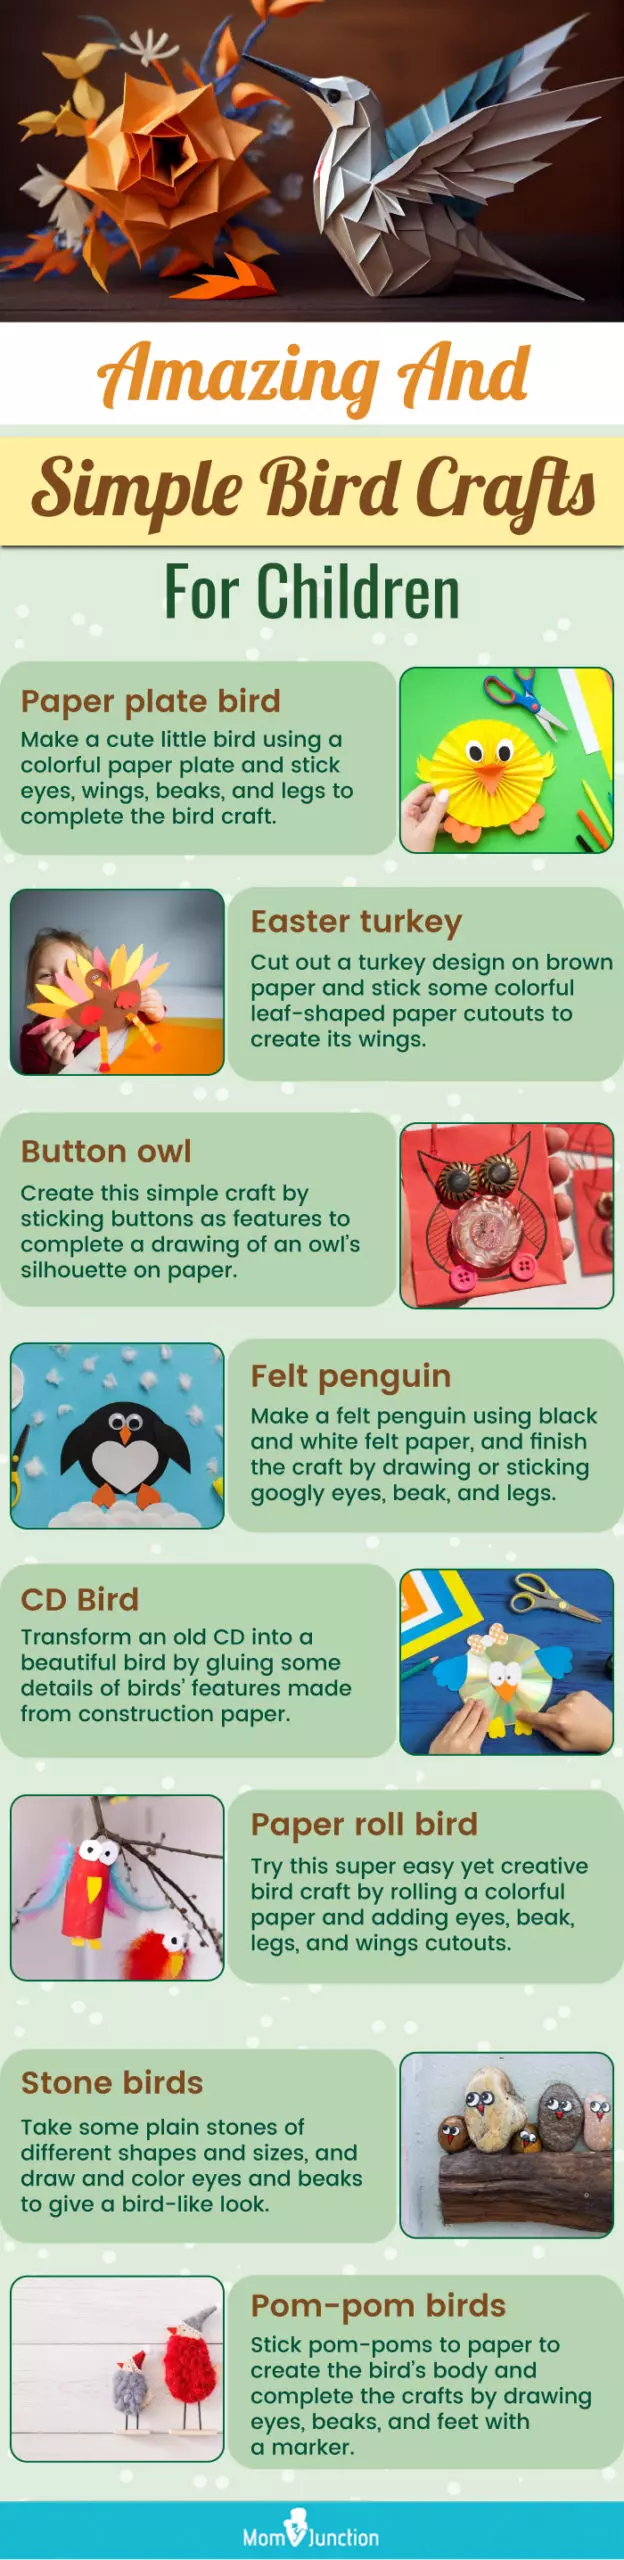 amazing and simple bird crafts for children (infographic)